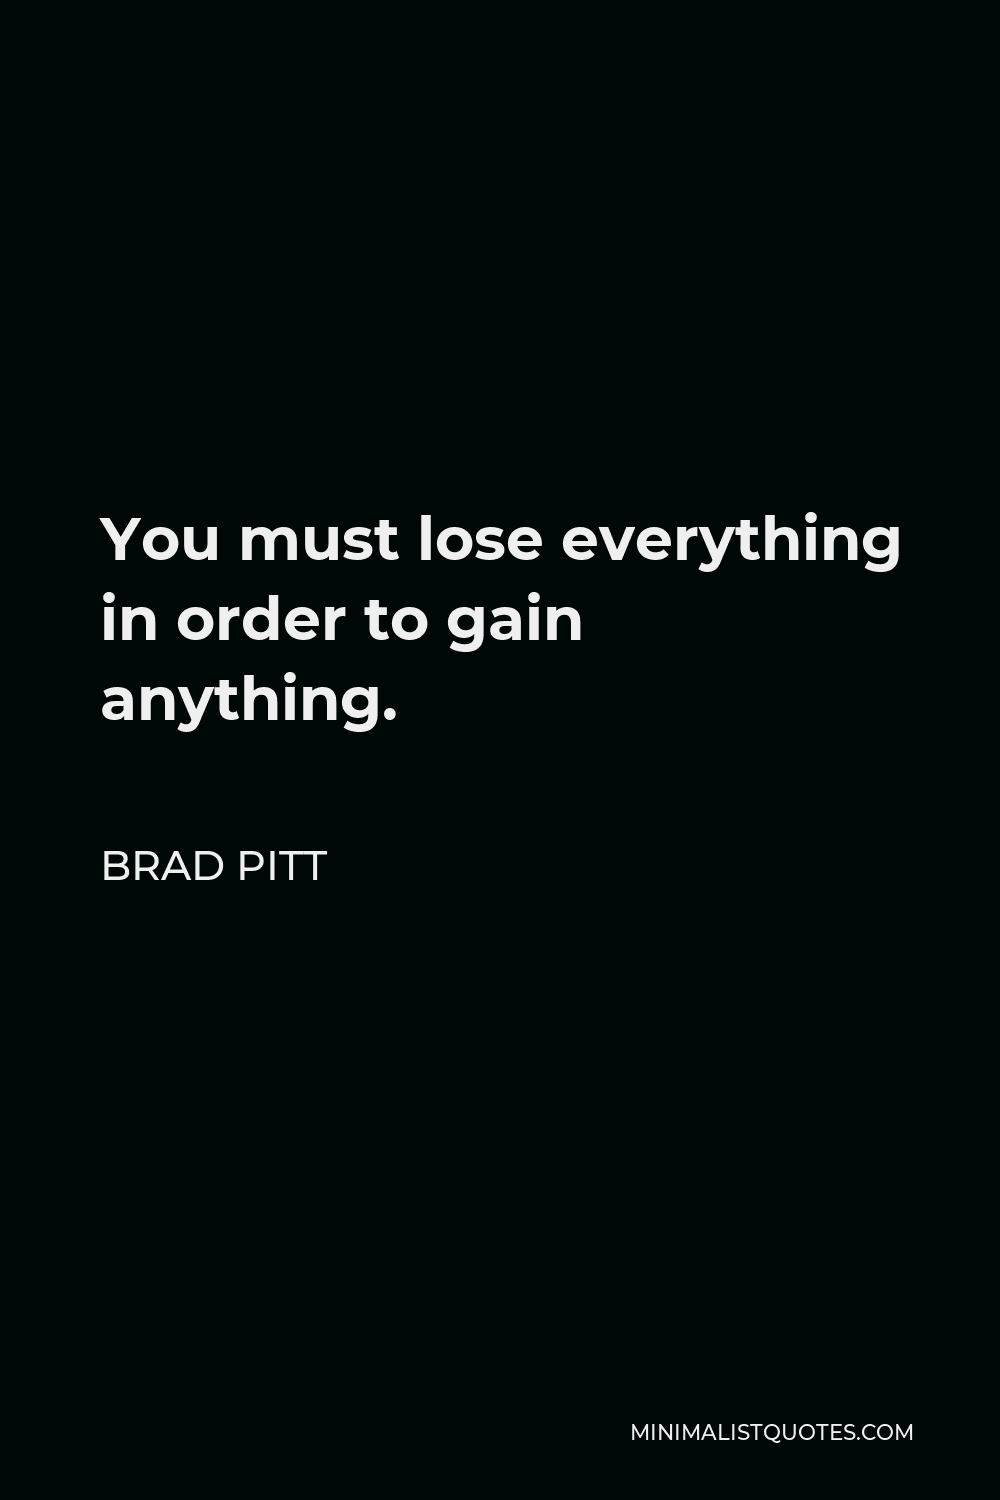 Brad Pitt Quote - You must lose everything in order to gain anything.